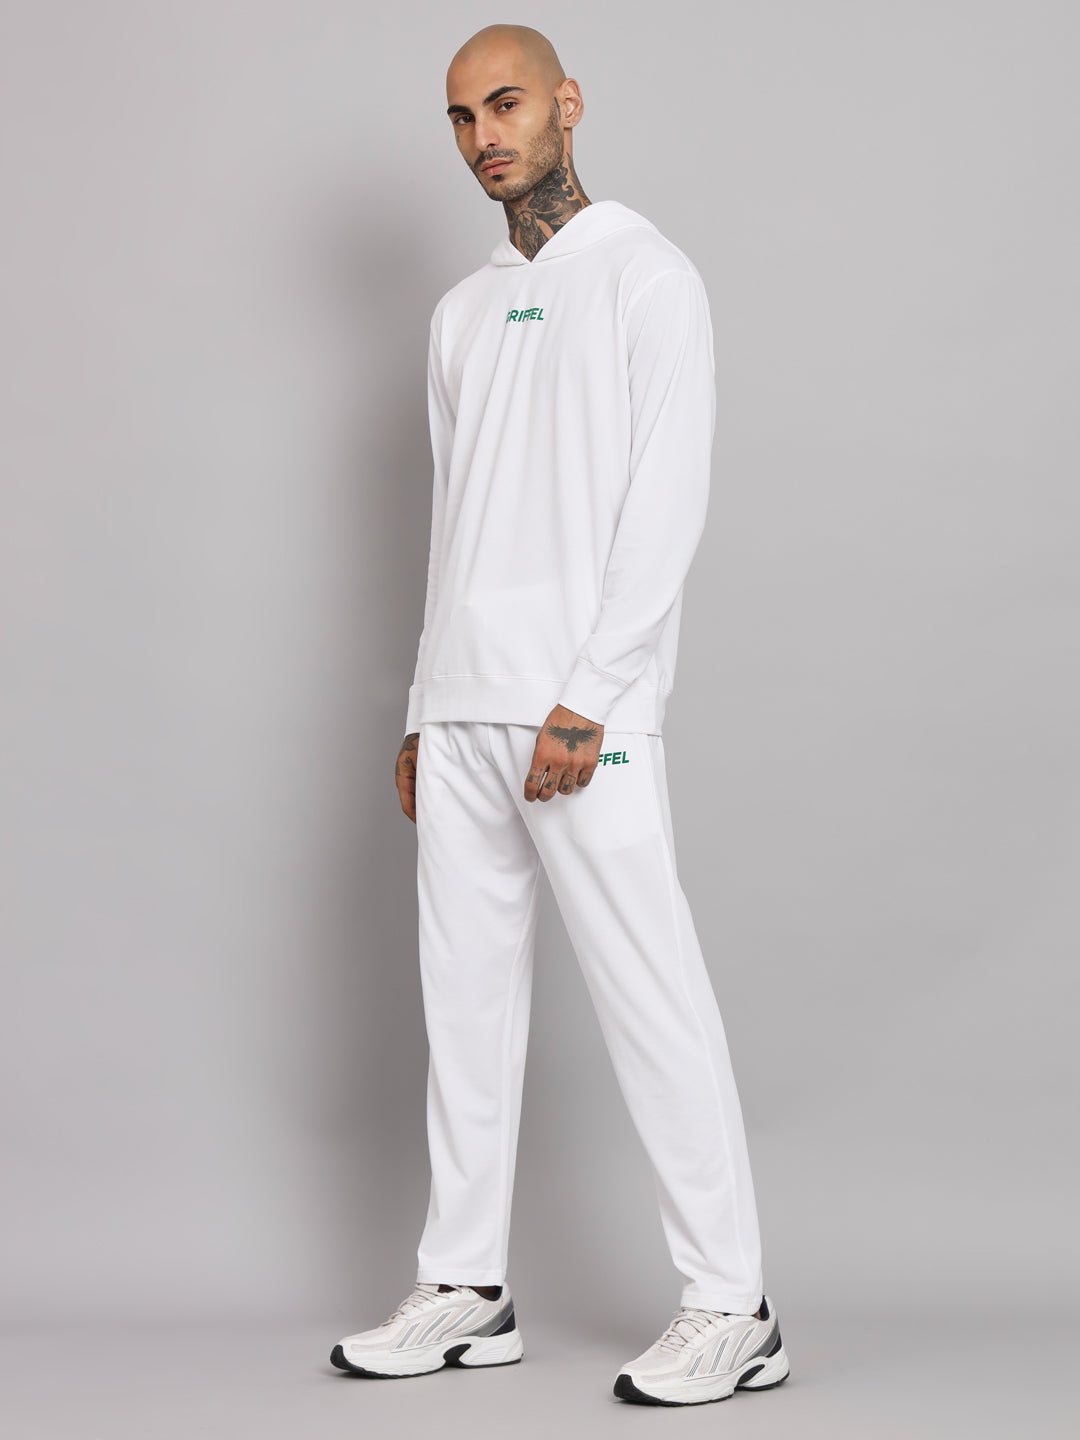 Griffel Men's Pre Winter Front Logo Solid Cotton Basic Hoodie and Joggers Full set White Tracksuit - griffel